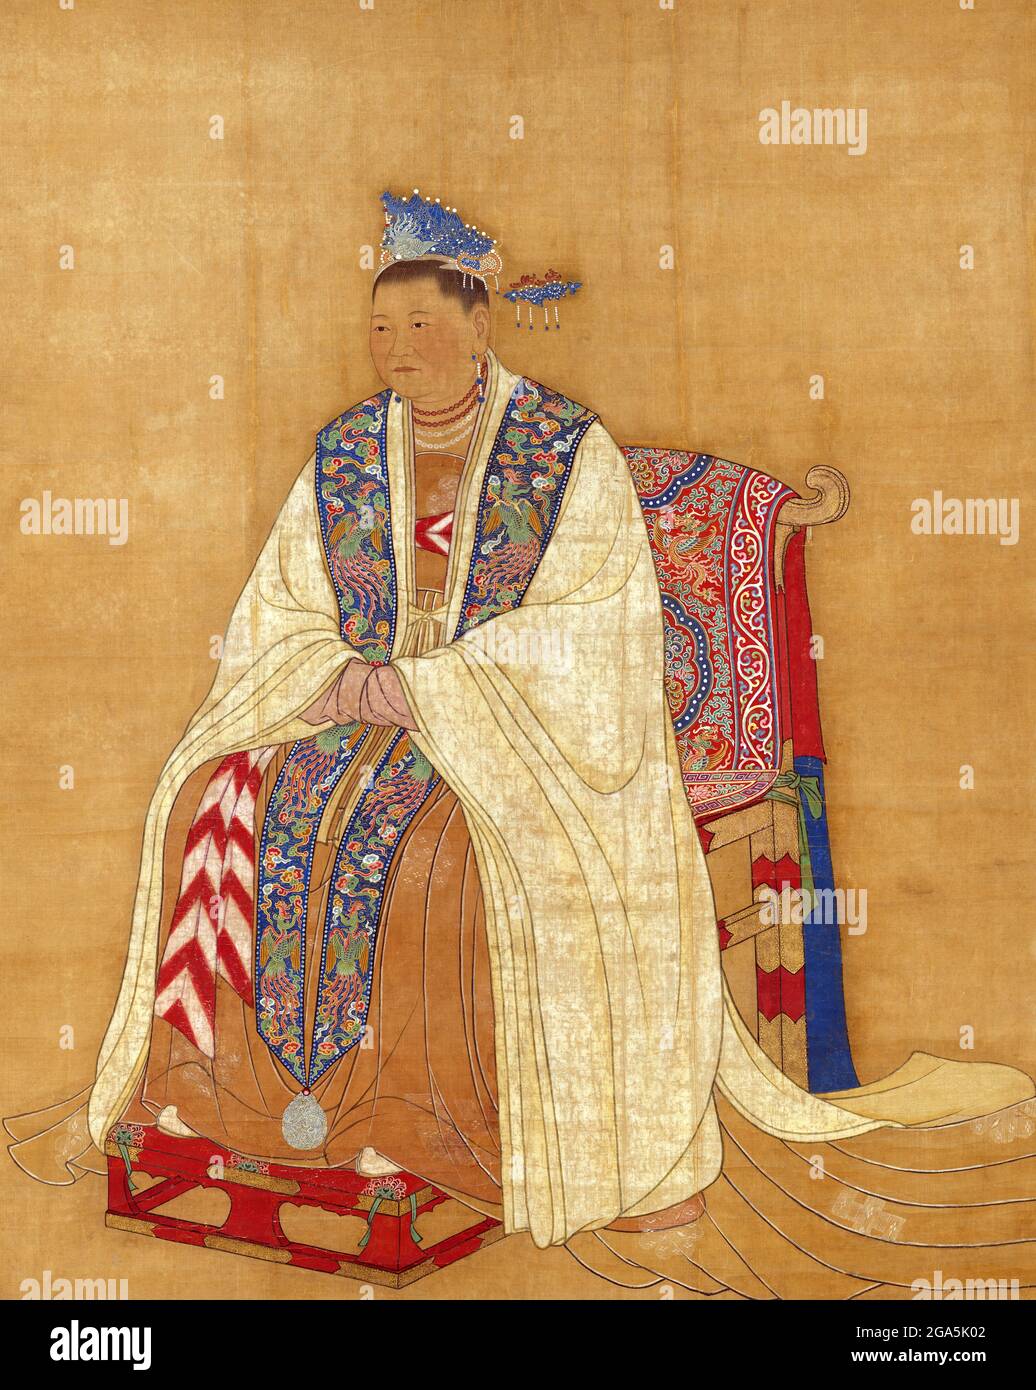 China: Empress Dowager Zhaoxian (902 - 17 July 961), mother of the first two Song emperors Taizu and Taizong. Hanging scroll painting, Song Dynasty (960-1279). Lady Du, formally known as Zhaoxian, was an empress dowager of the Song Dynasty. She was the wife of general Zhao Hongyin and mother of the first two Song emperors Taizu and Taizong. Emperor Taizong claimed legitimacy to the throne through her apparent will, allegedly sealed in a golden shelf at her death, though many historians believe he fabricated this. Stock Photo